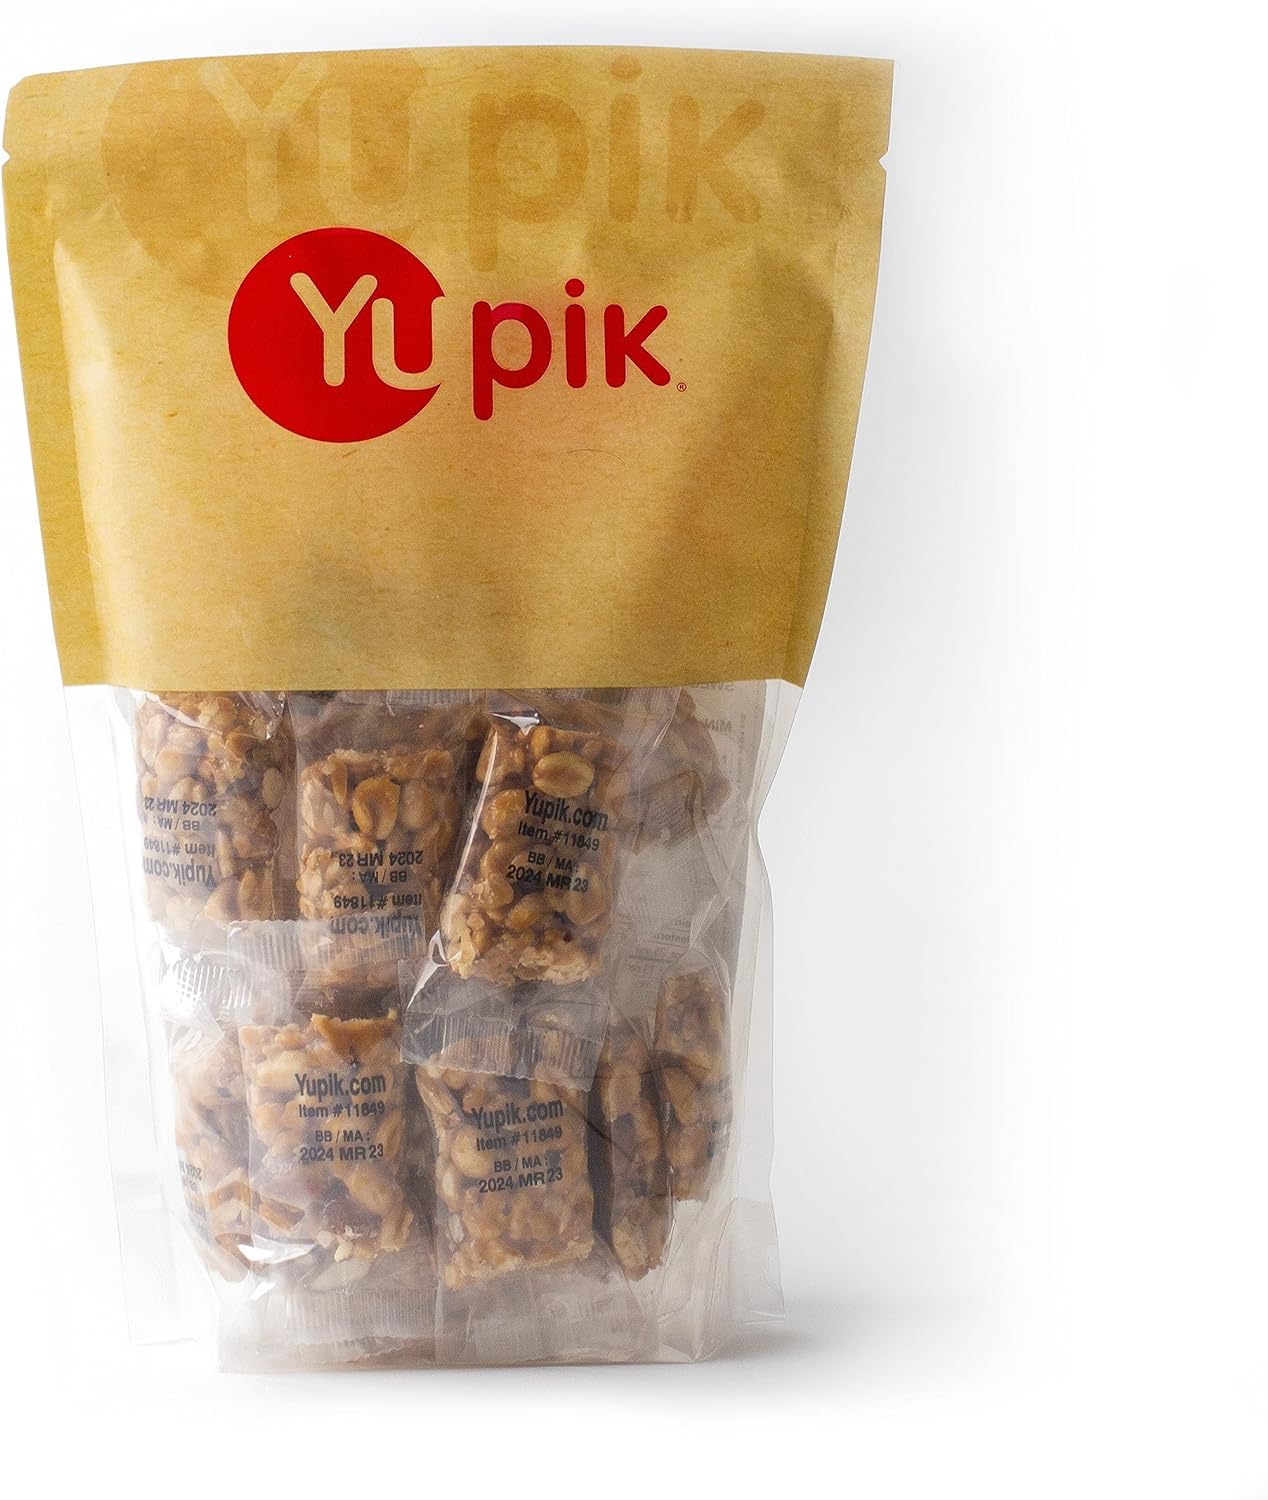 Yupik Sweet & Salty Mini Bars, 1 lb, Individually Wrapped, Healthy Snack, Nut Bars, Crunch Bars, Gluten-Free with Peanuts, Honey, Peanut Butter, Crispy Brown Rice, Almonds, Snack On the Go